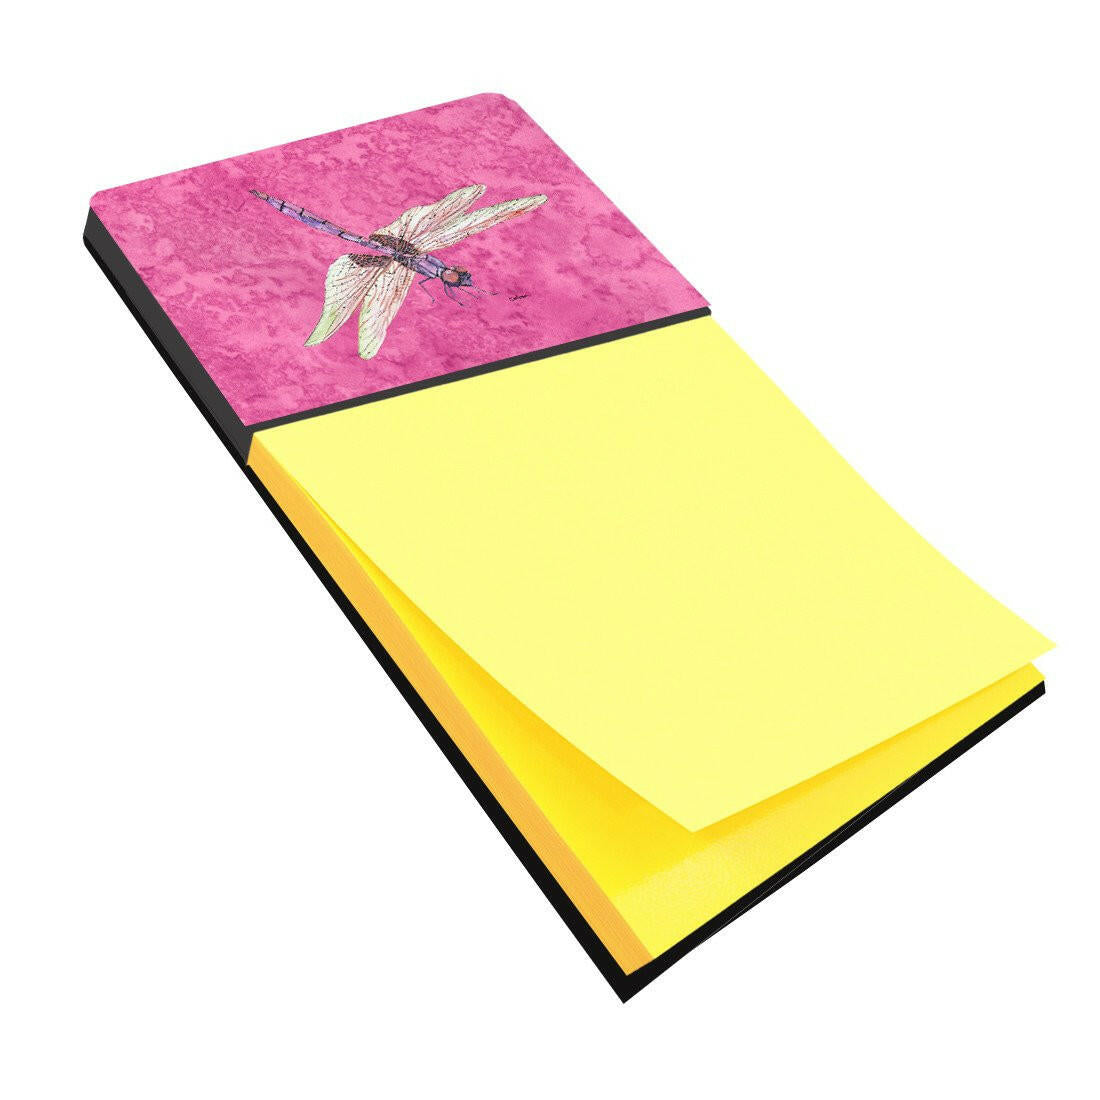 Dragonfly on Pink Refiillable Sticky Note Holder or Postit Note Dispenser 8891SN by Caroline's Treasures